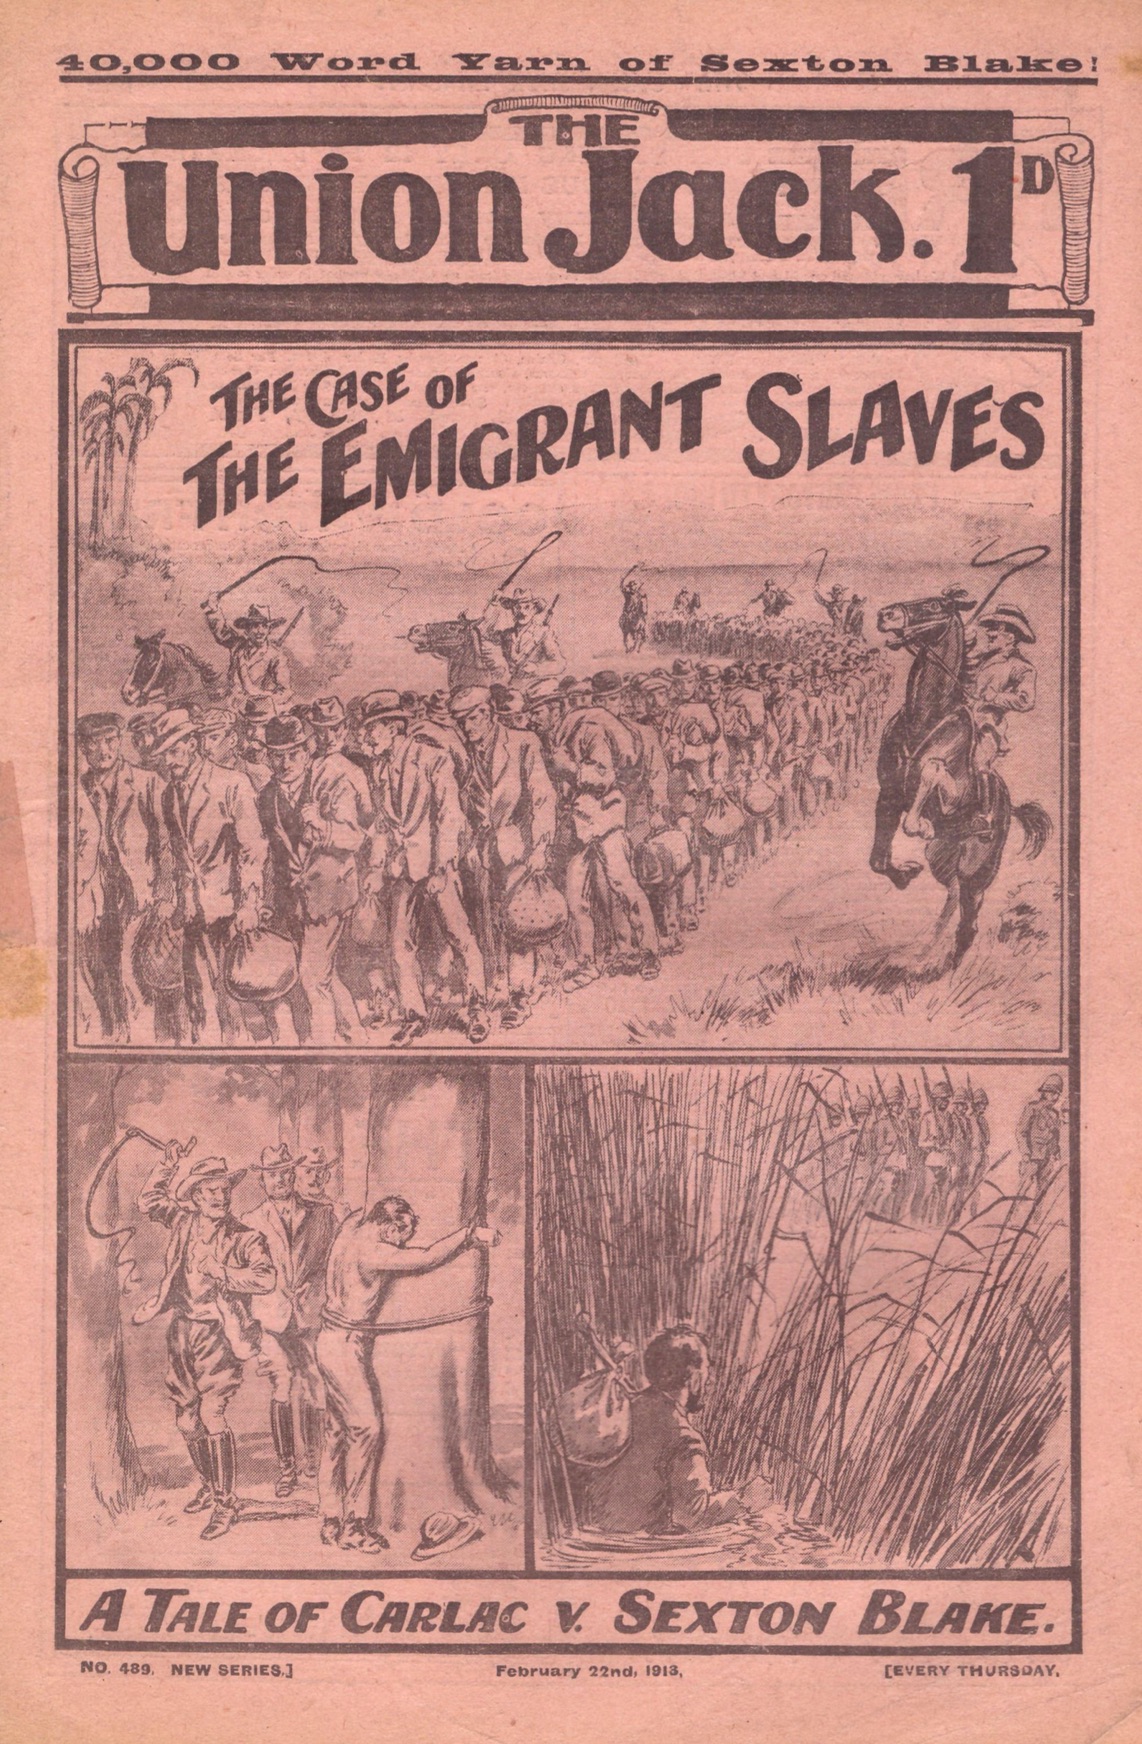 THE CASE OF THE EMIGRANT SLAVES